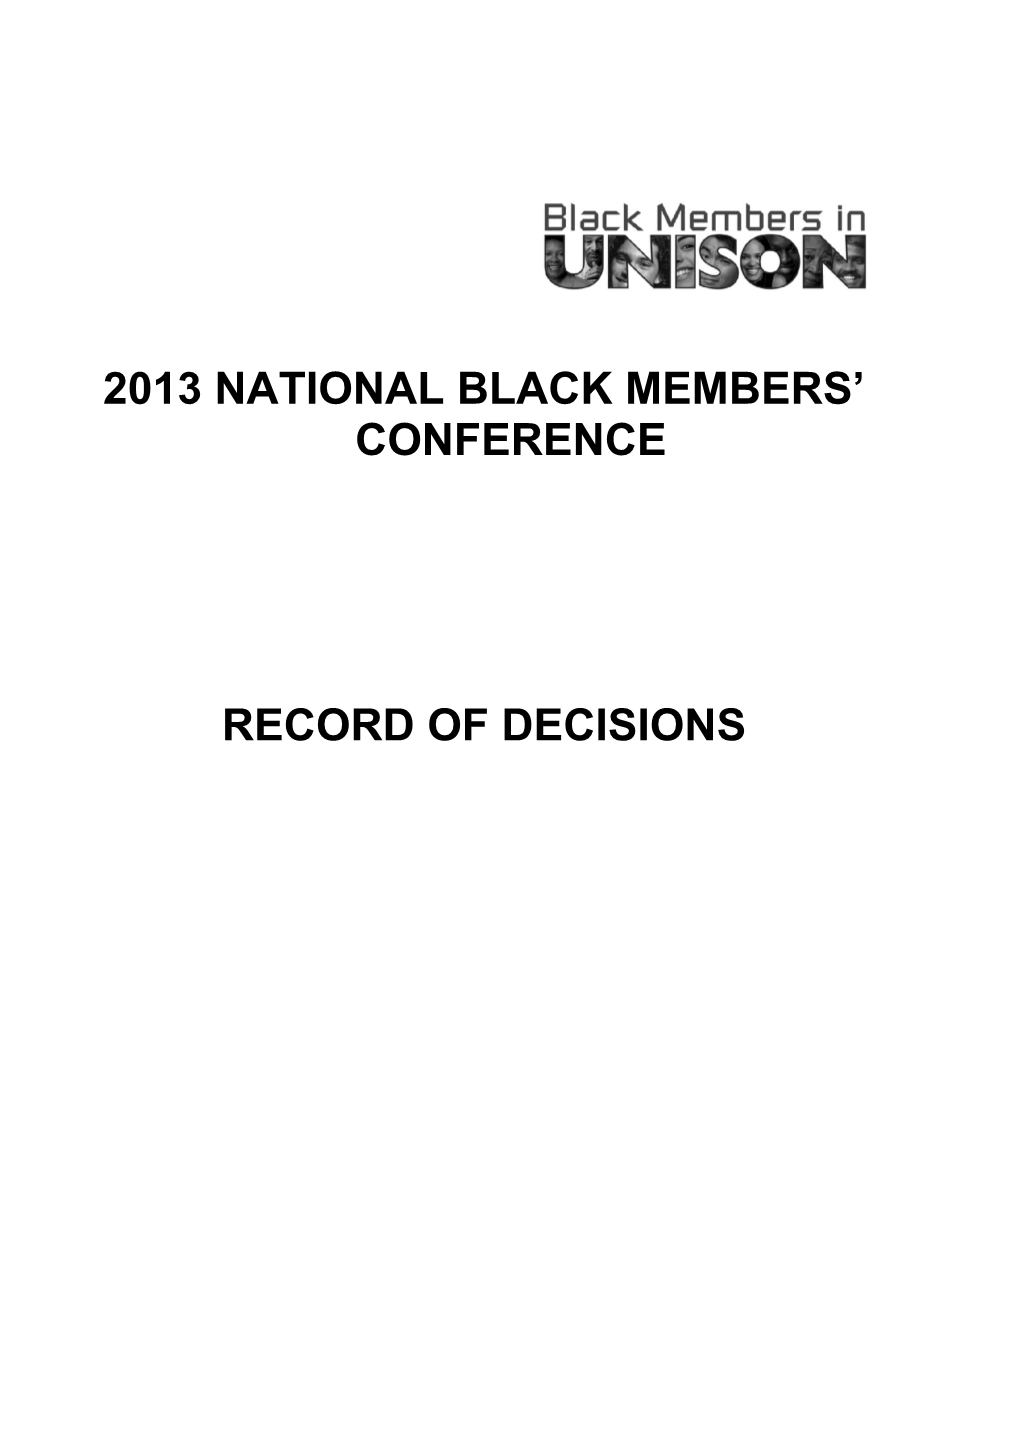 2013 National Black Members' Conference Decisions